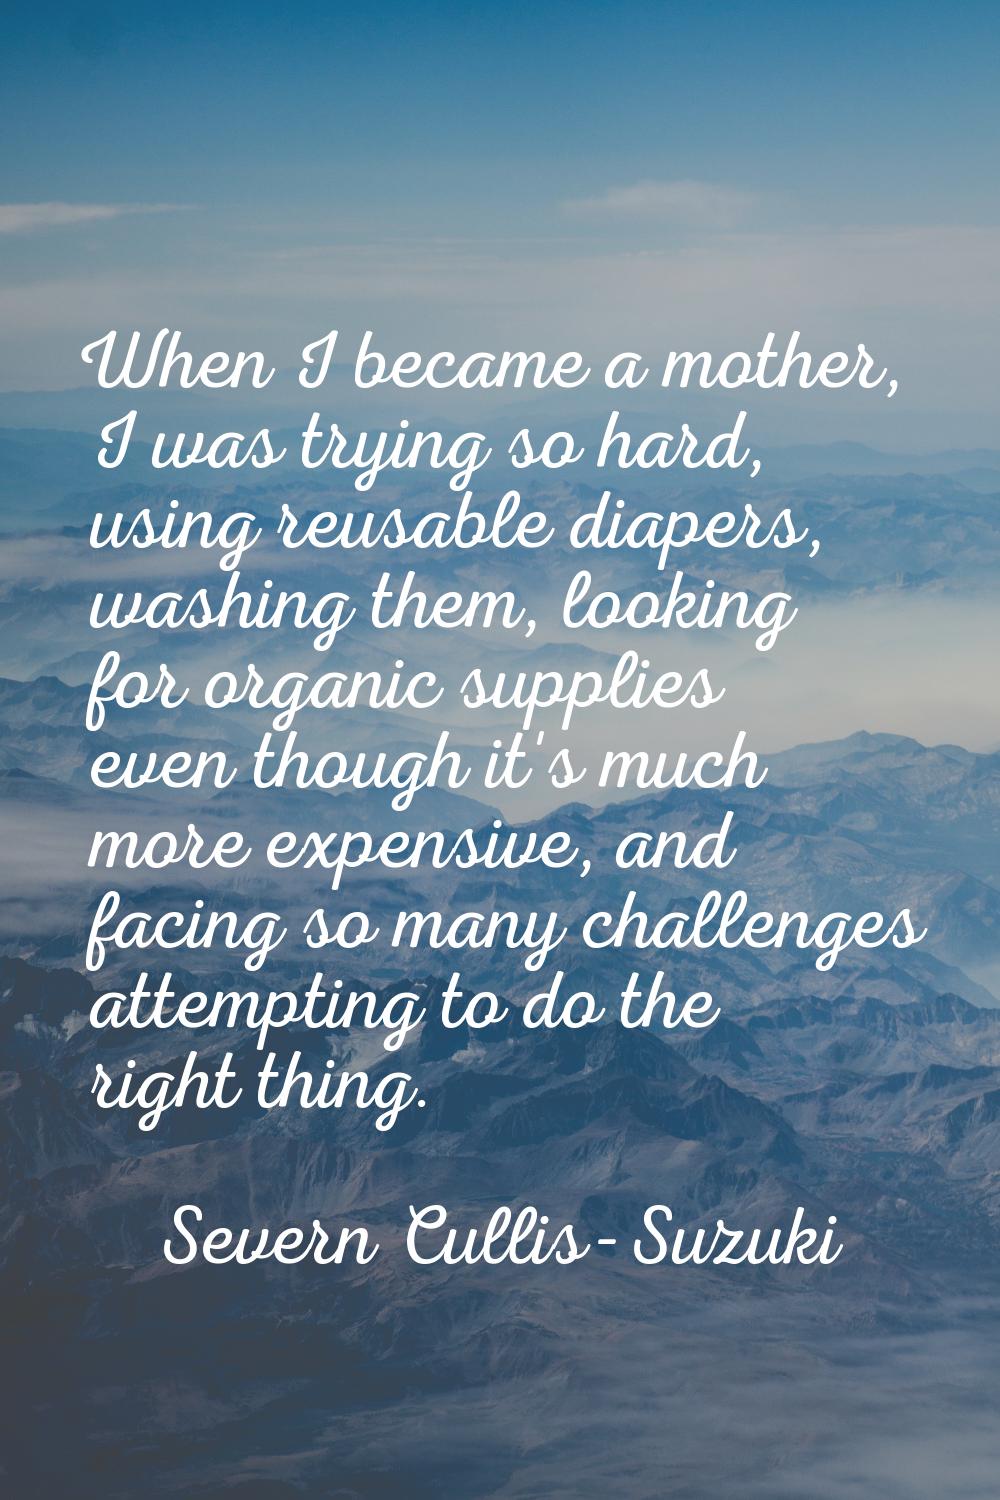 When I became a mother, I was trying so hard, using reusable diapers, washing them, looking for org